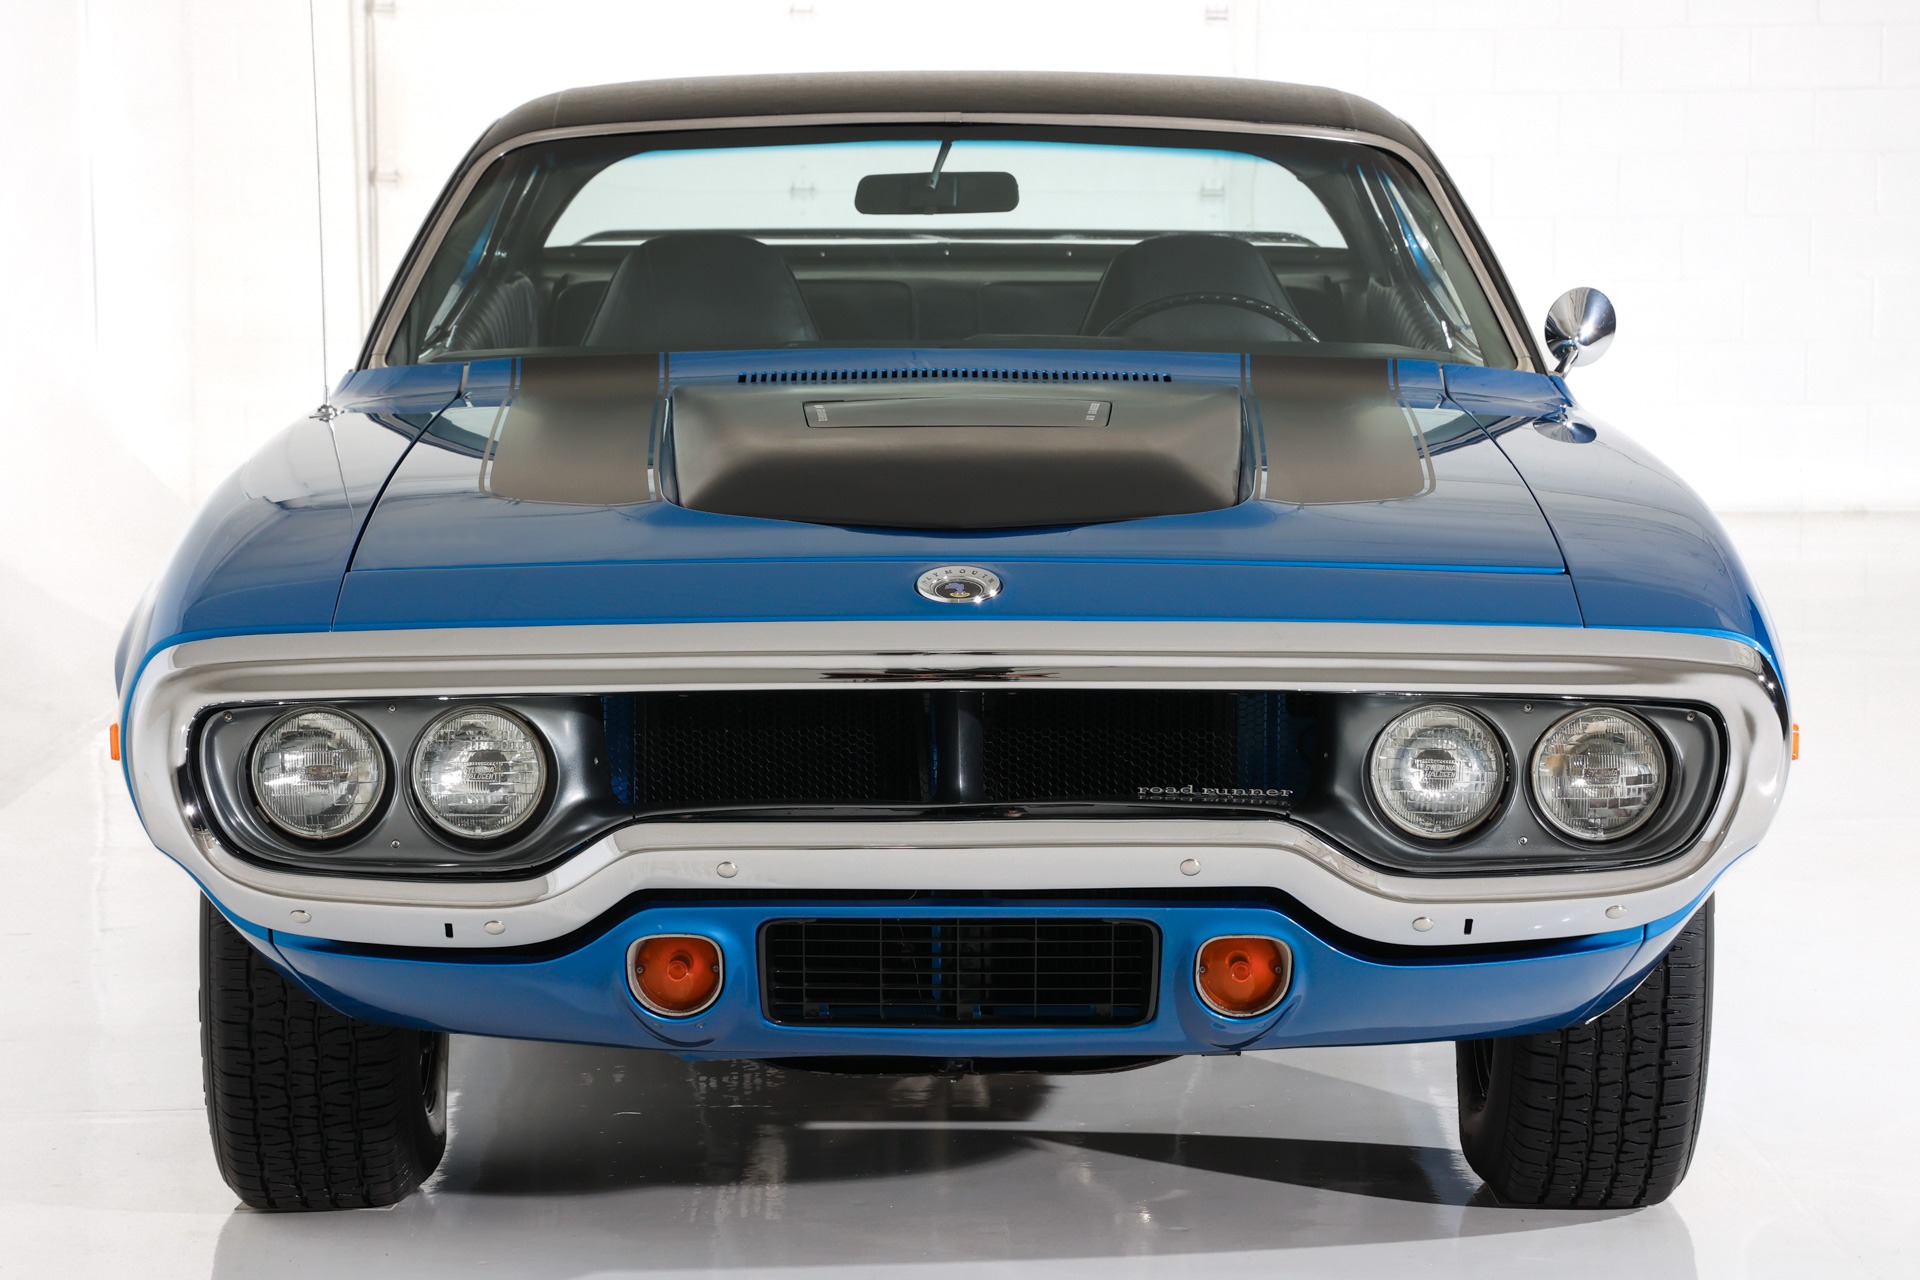 For Sale Used 1972 Plymouth Roadrunner 383, 4-Speed Pistol Grip | American Dream Machines Des Moines IA 50309